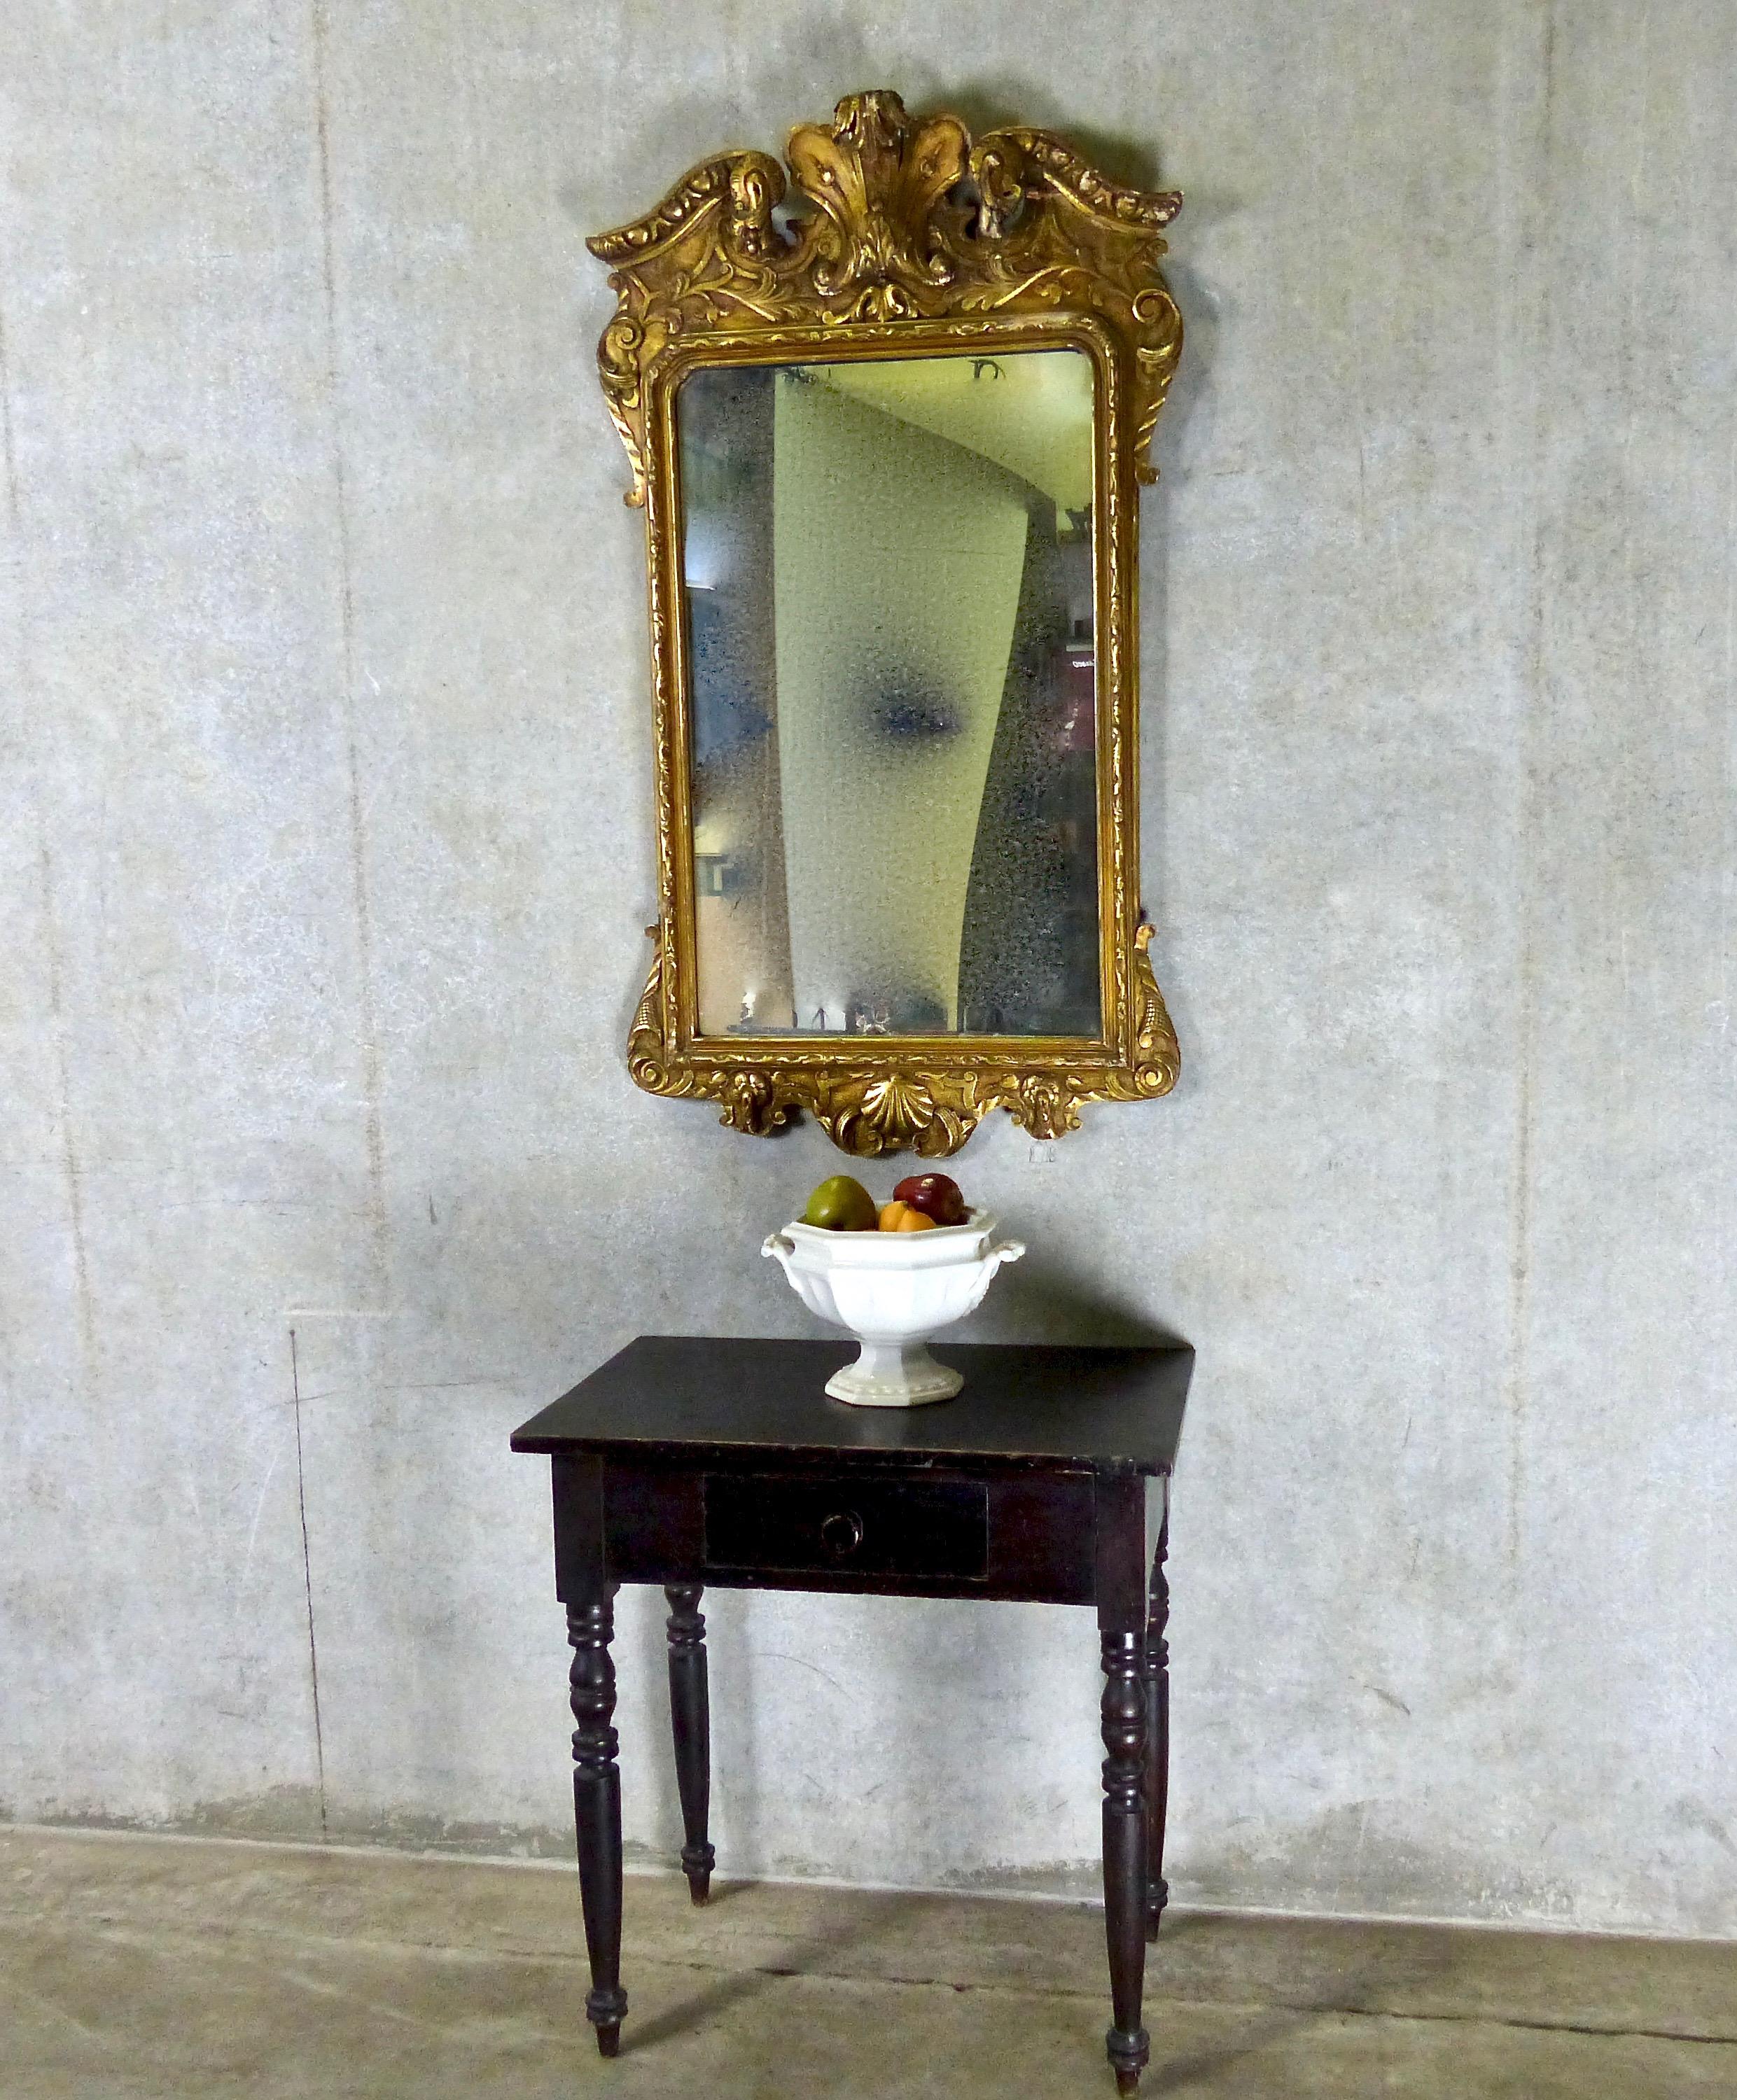 19th century antique french mirror in nyc